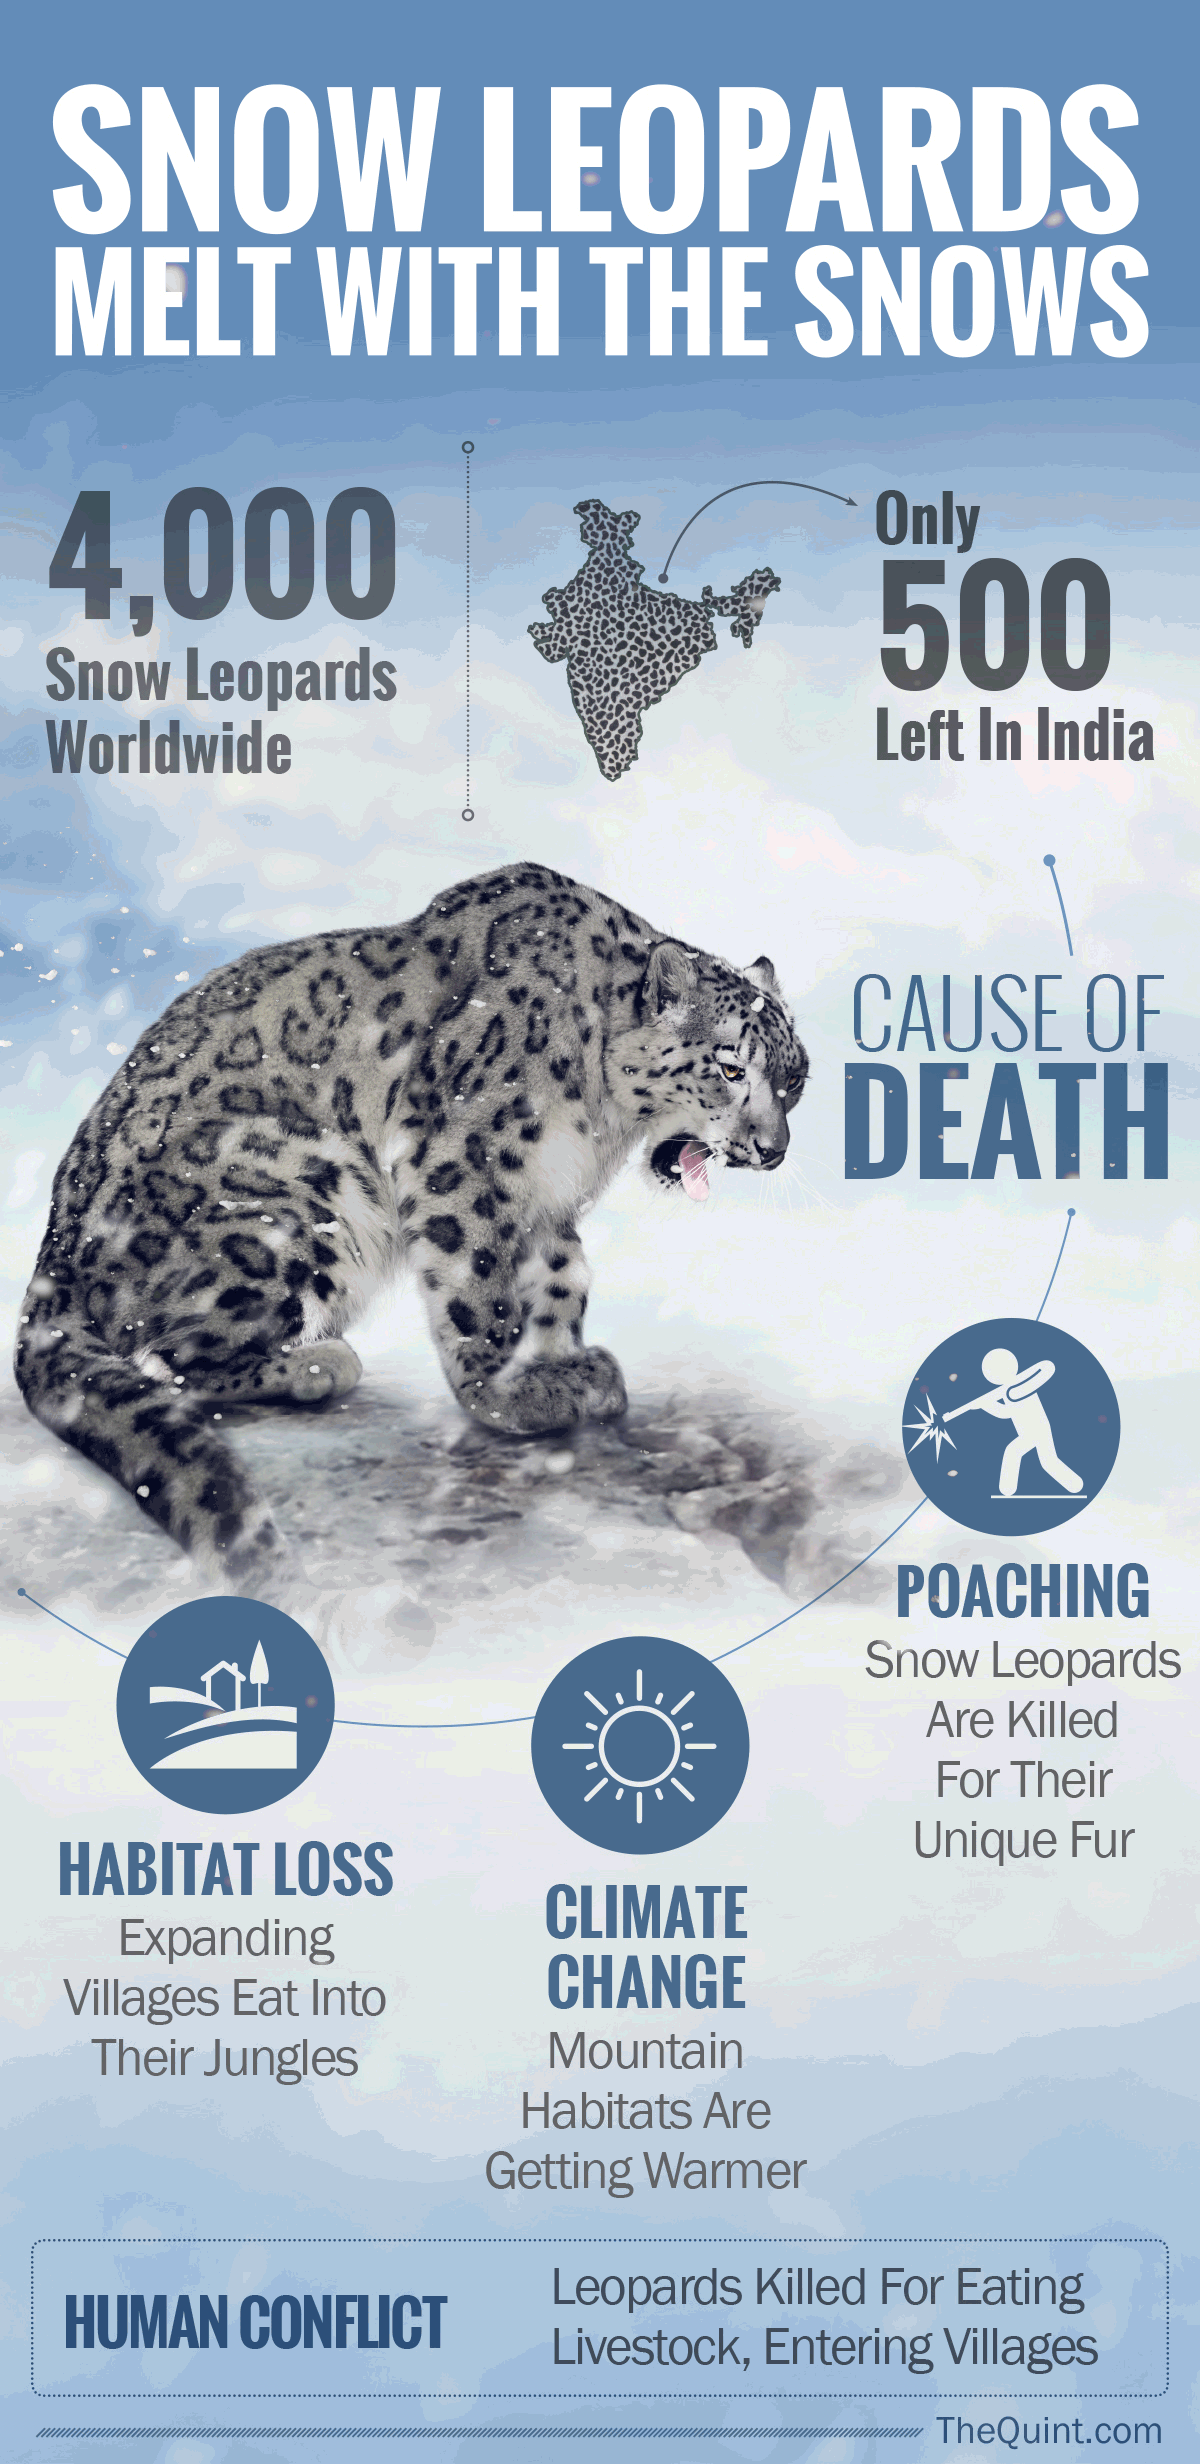 Snow leopard population numbers are down. Can we save them?